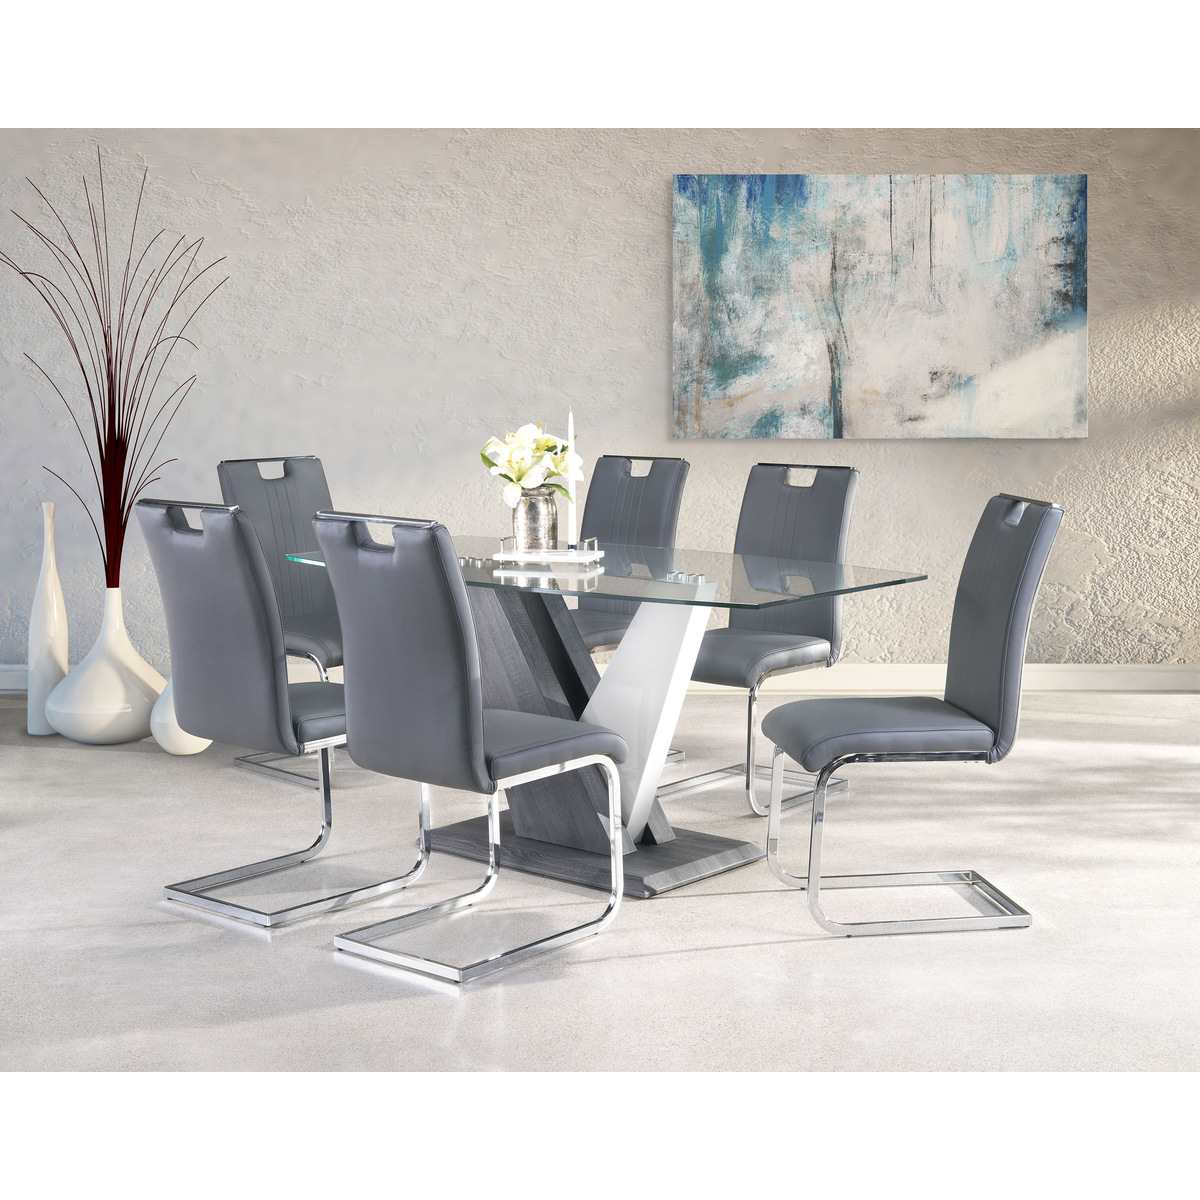 Baxter Dining Collection Grey 7383-63/738S4